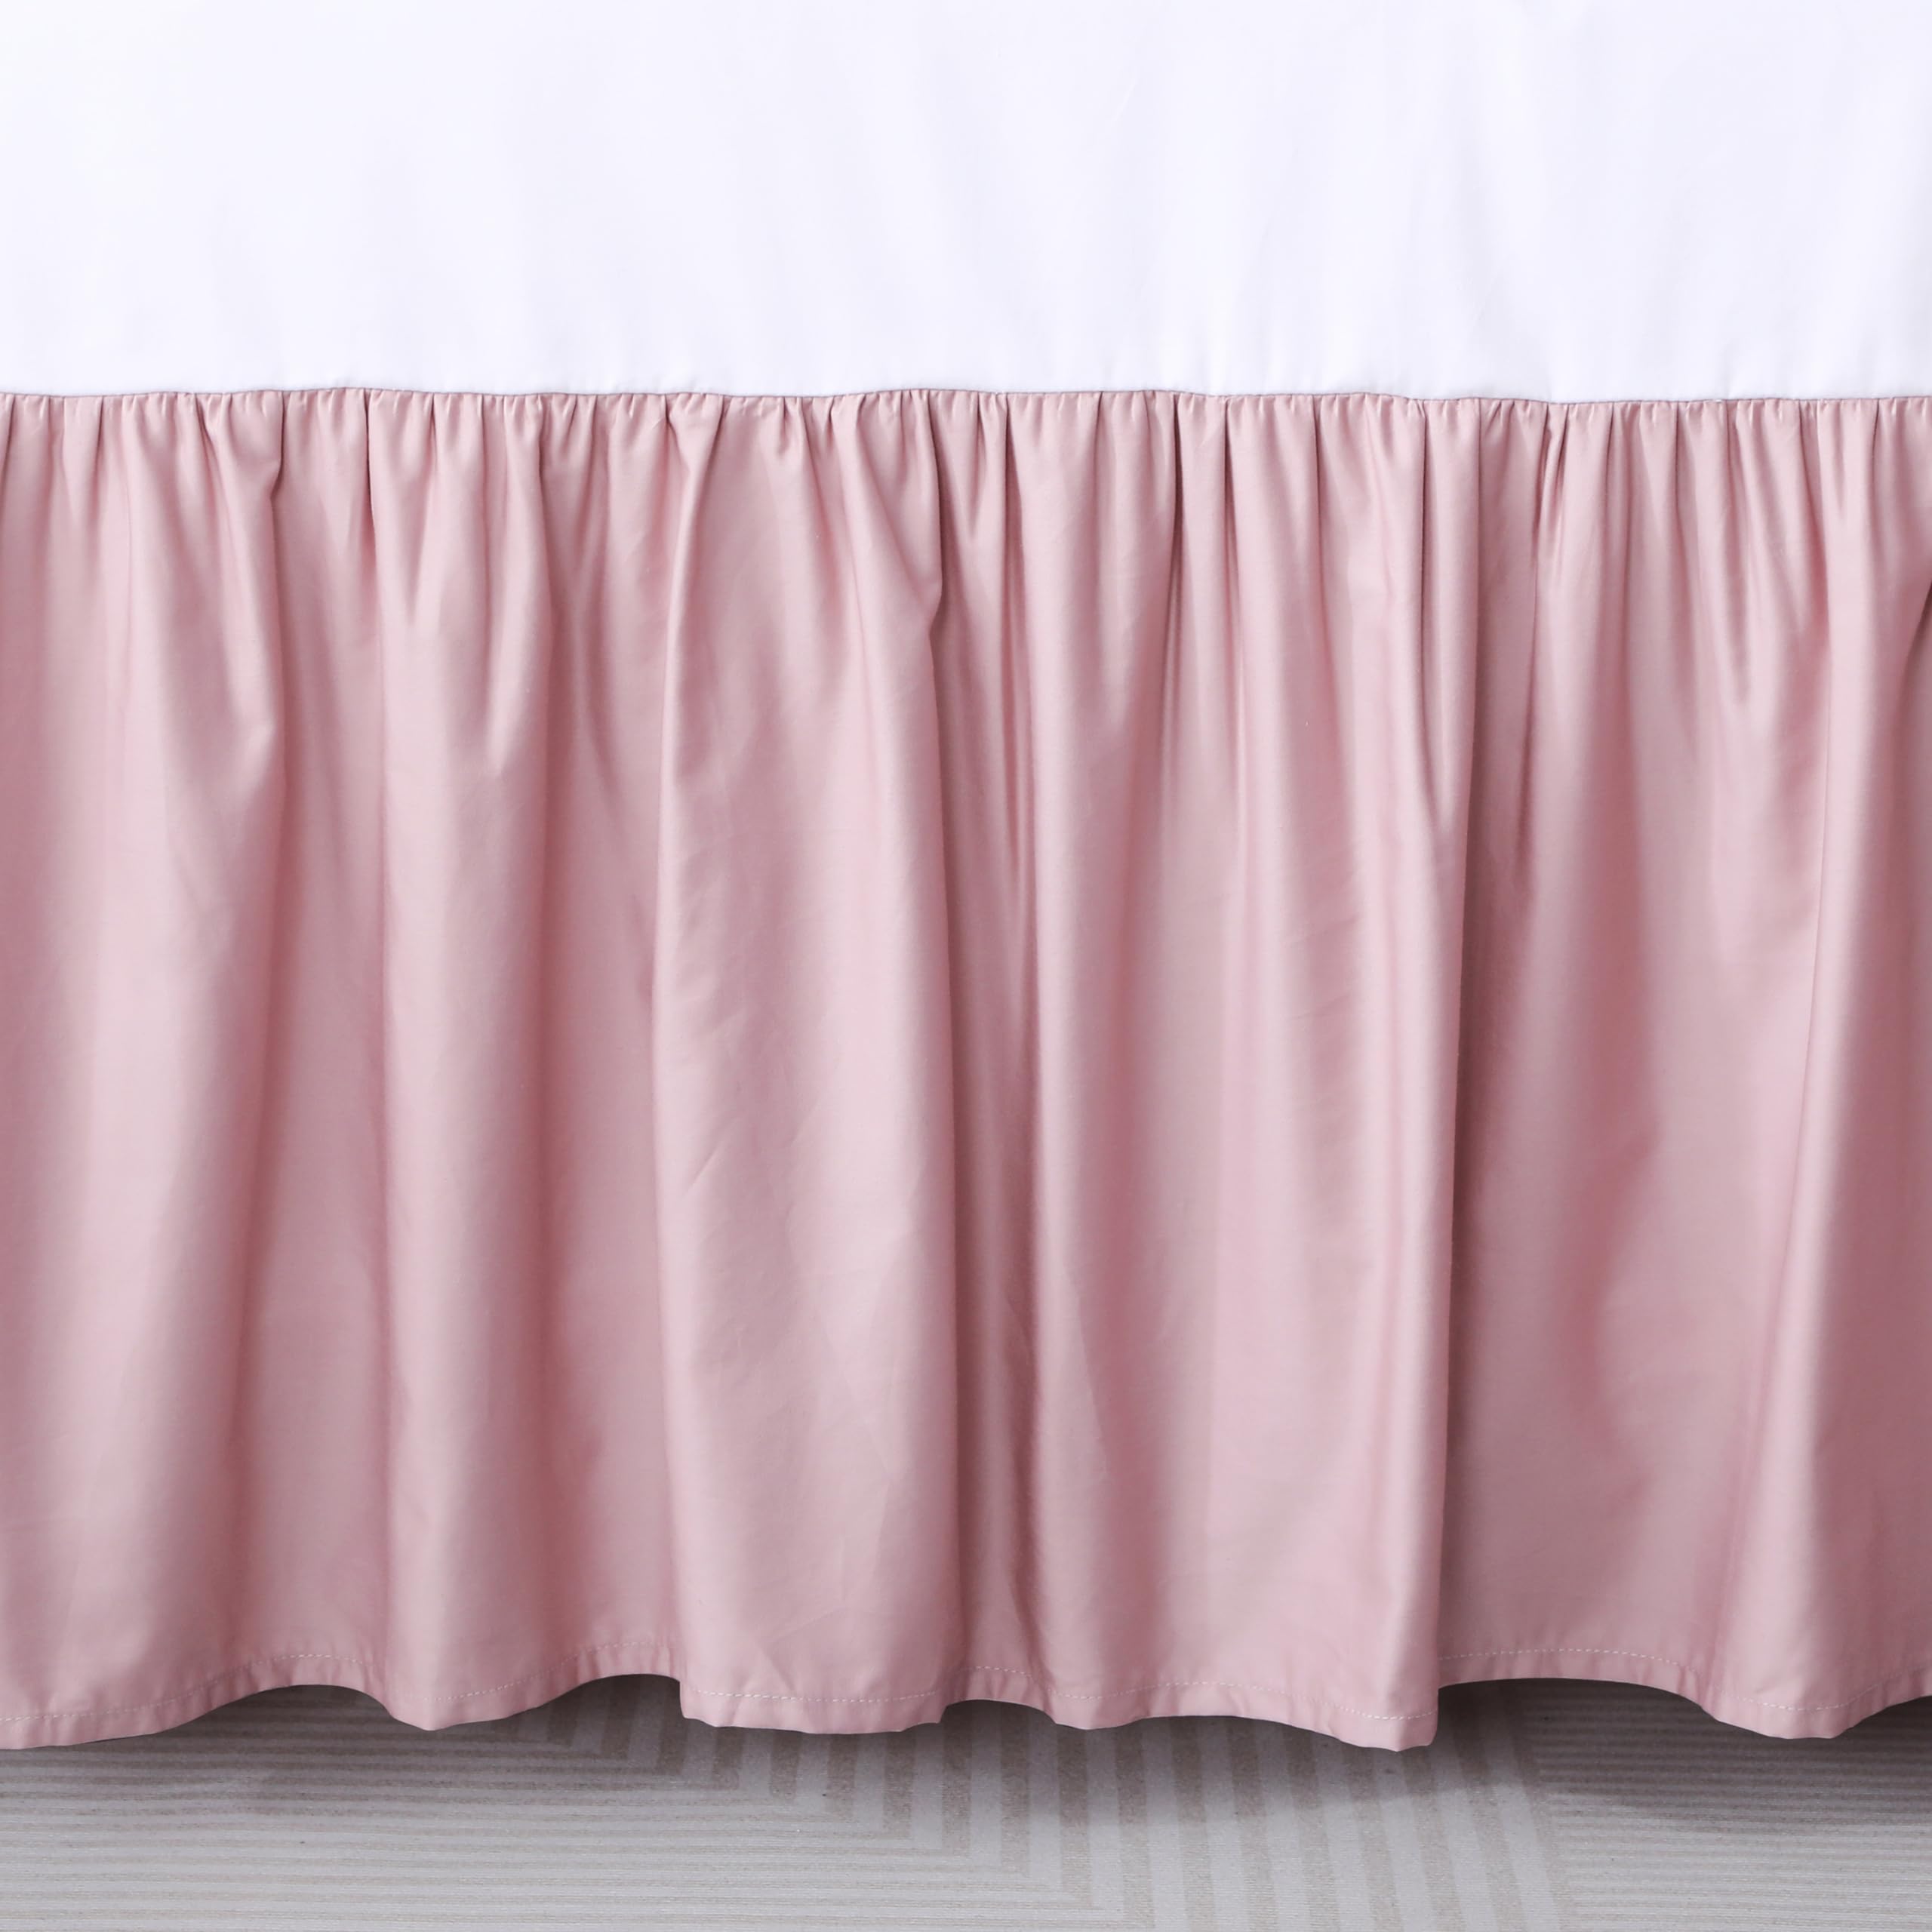 Crib Skirt Dust RuffleCrib Skirt Dust Ruffle, 100% Egyptian Cotton 400 Thread Count Soft Breathable Crib Bedding Skirt for Baby, Boys and Girls, Fading Resistant (Pink)